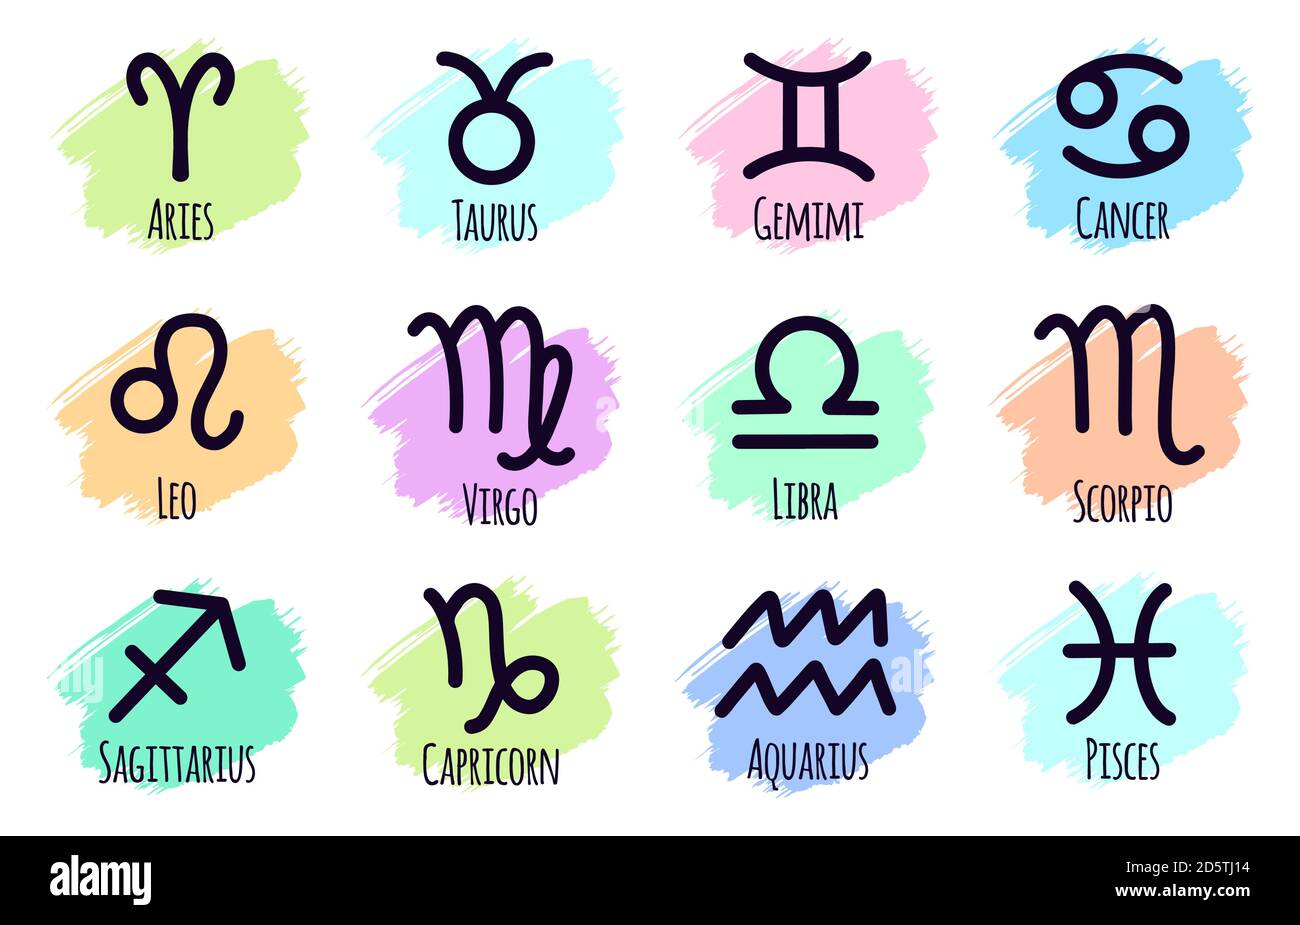 Other Astrological Signs